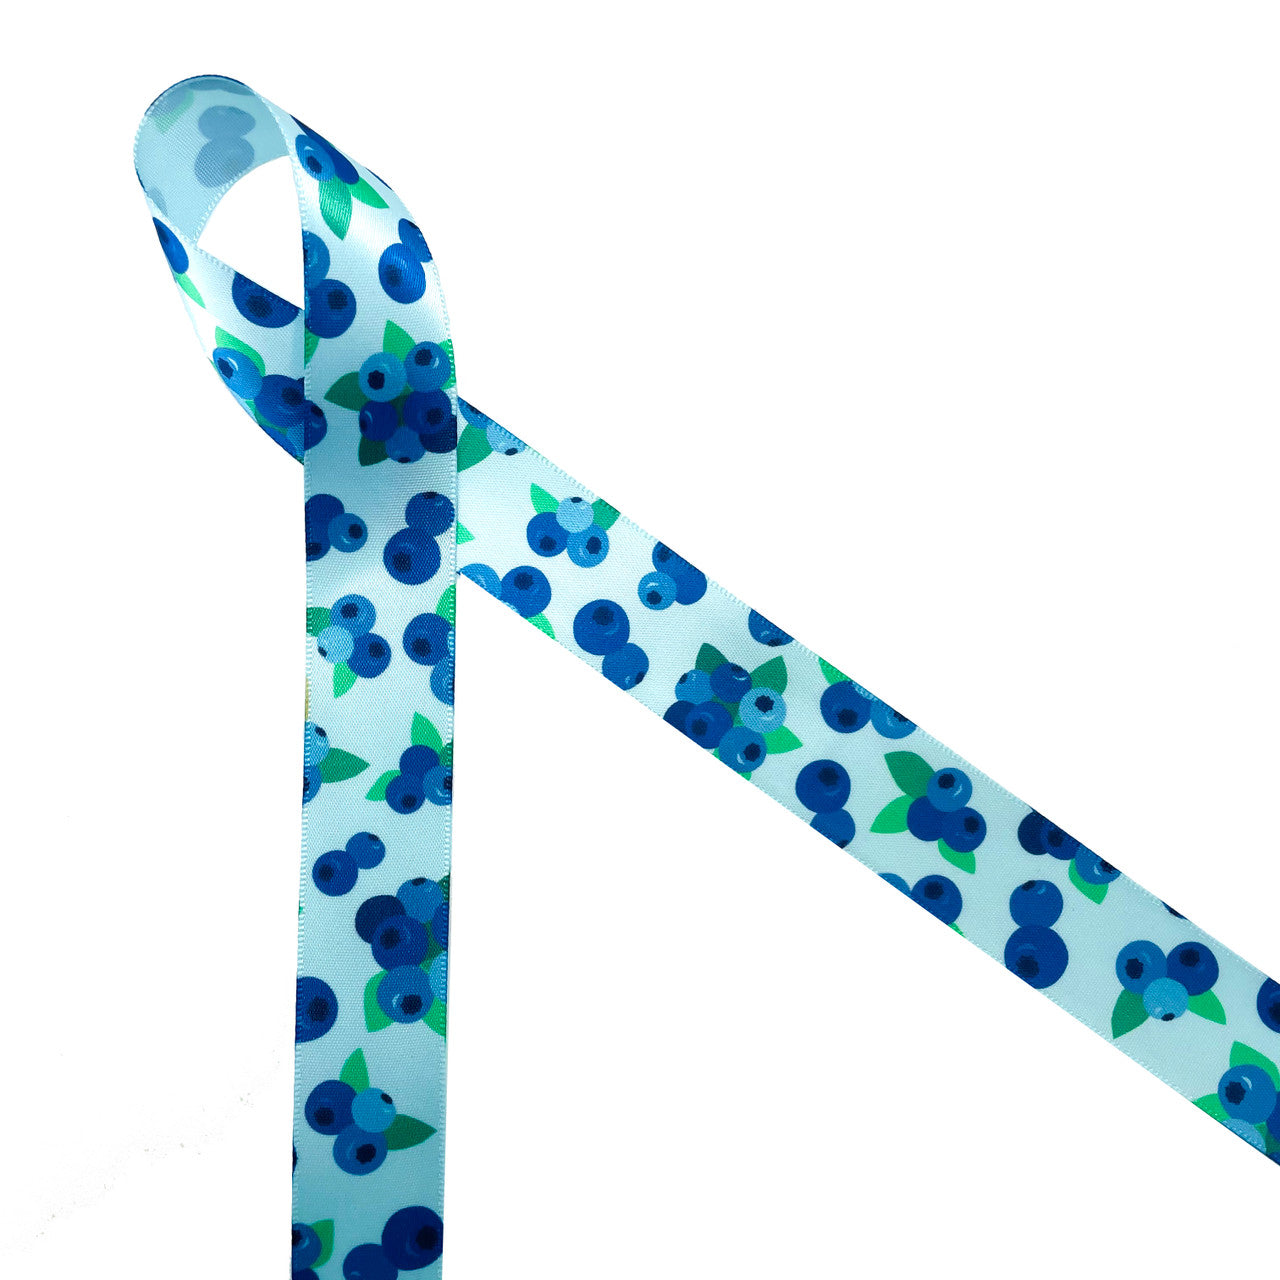 Blueberries ribbon Ripe dark blue blueberries large and small with green leaves printed on 5/8" and 7/8" light blue satin